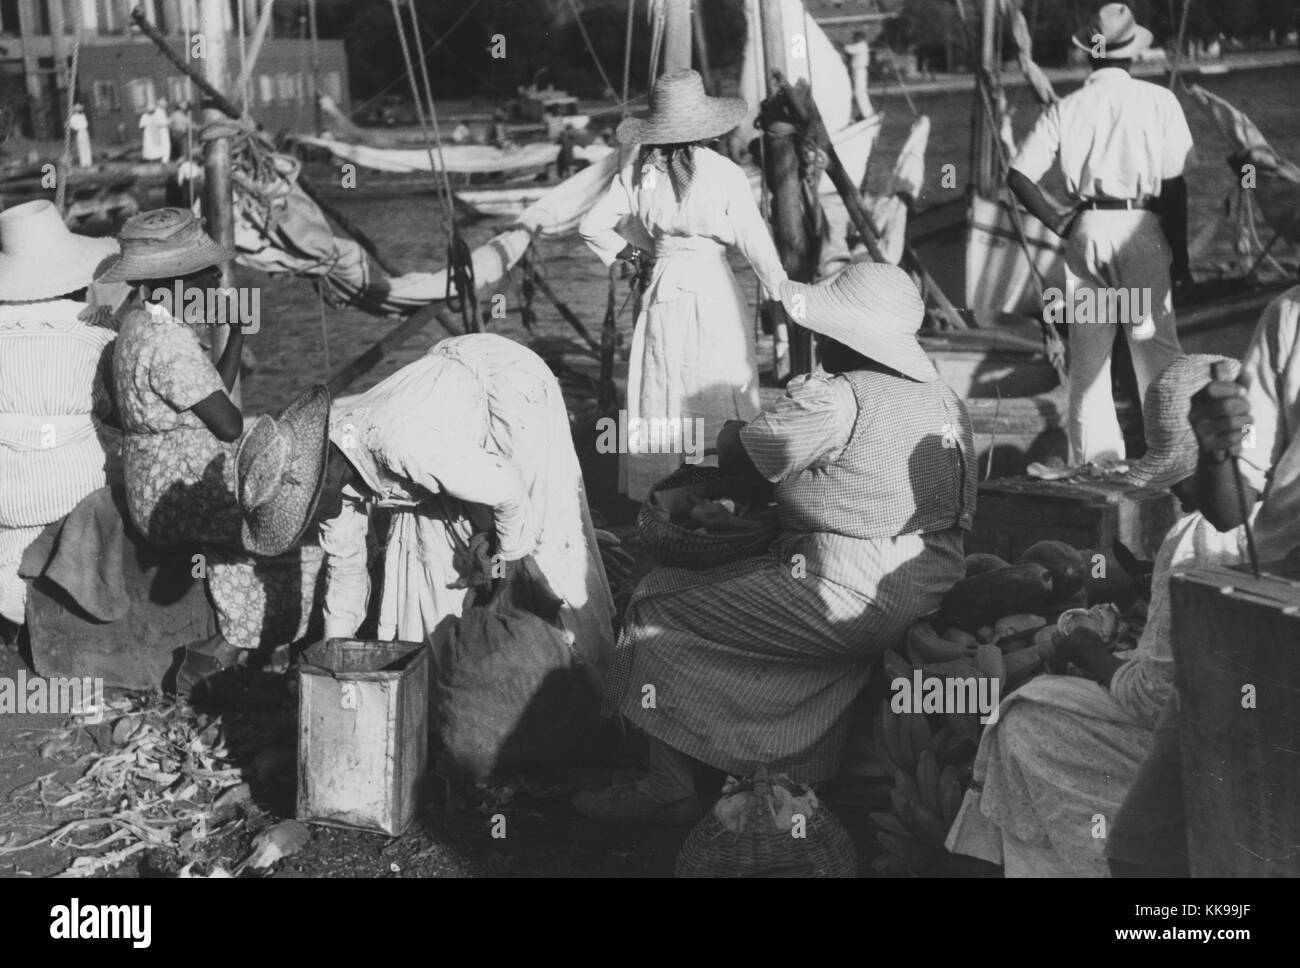 Black and white photograph of a group of women, wearing dresses and wide brimmed hats, selling provisions at Tortola Wharf, Saint Thomas, Virgin Islands, December, 1941. From the New York Public Library. Stock Photo